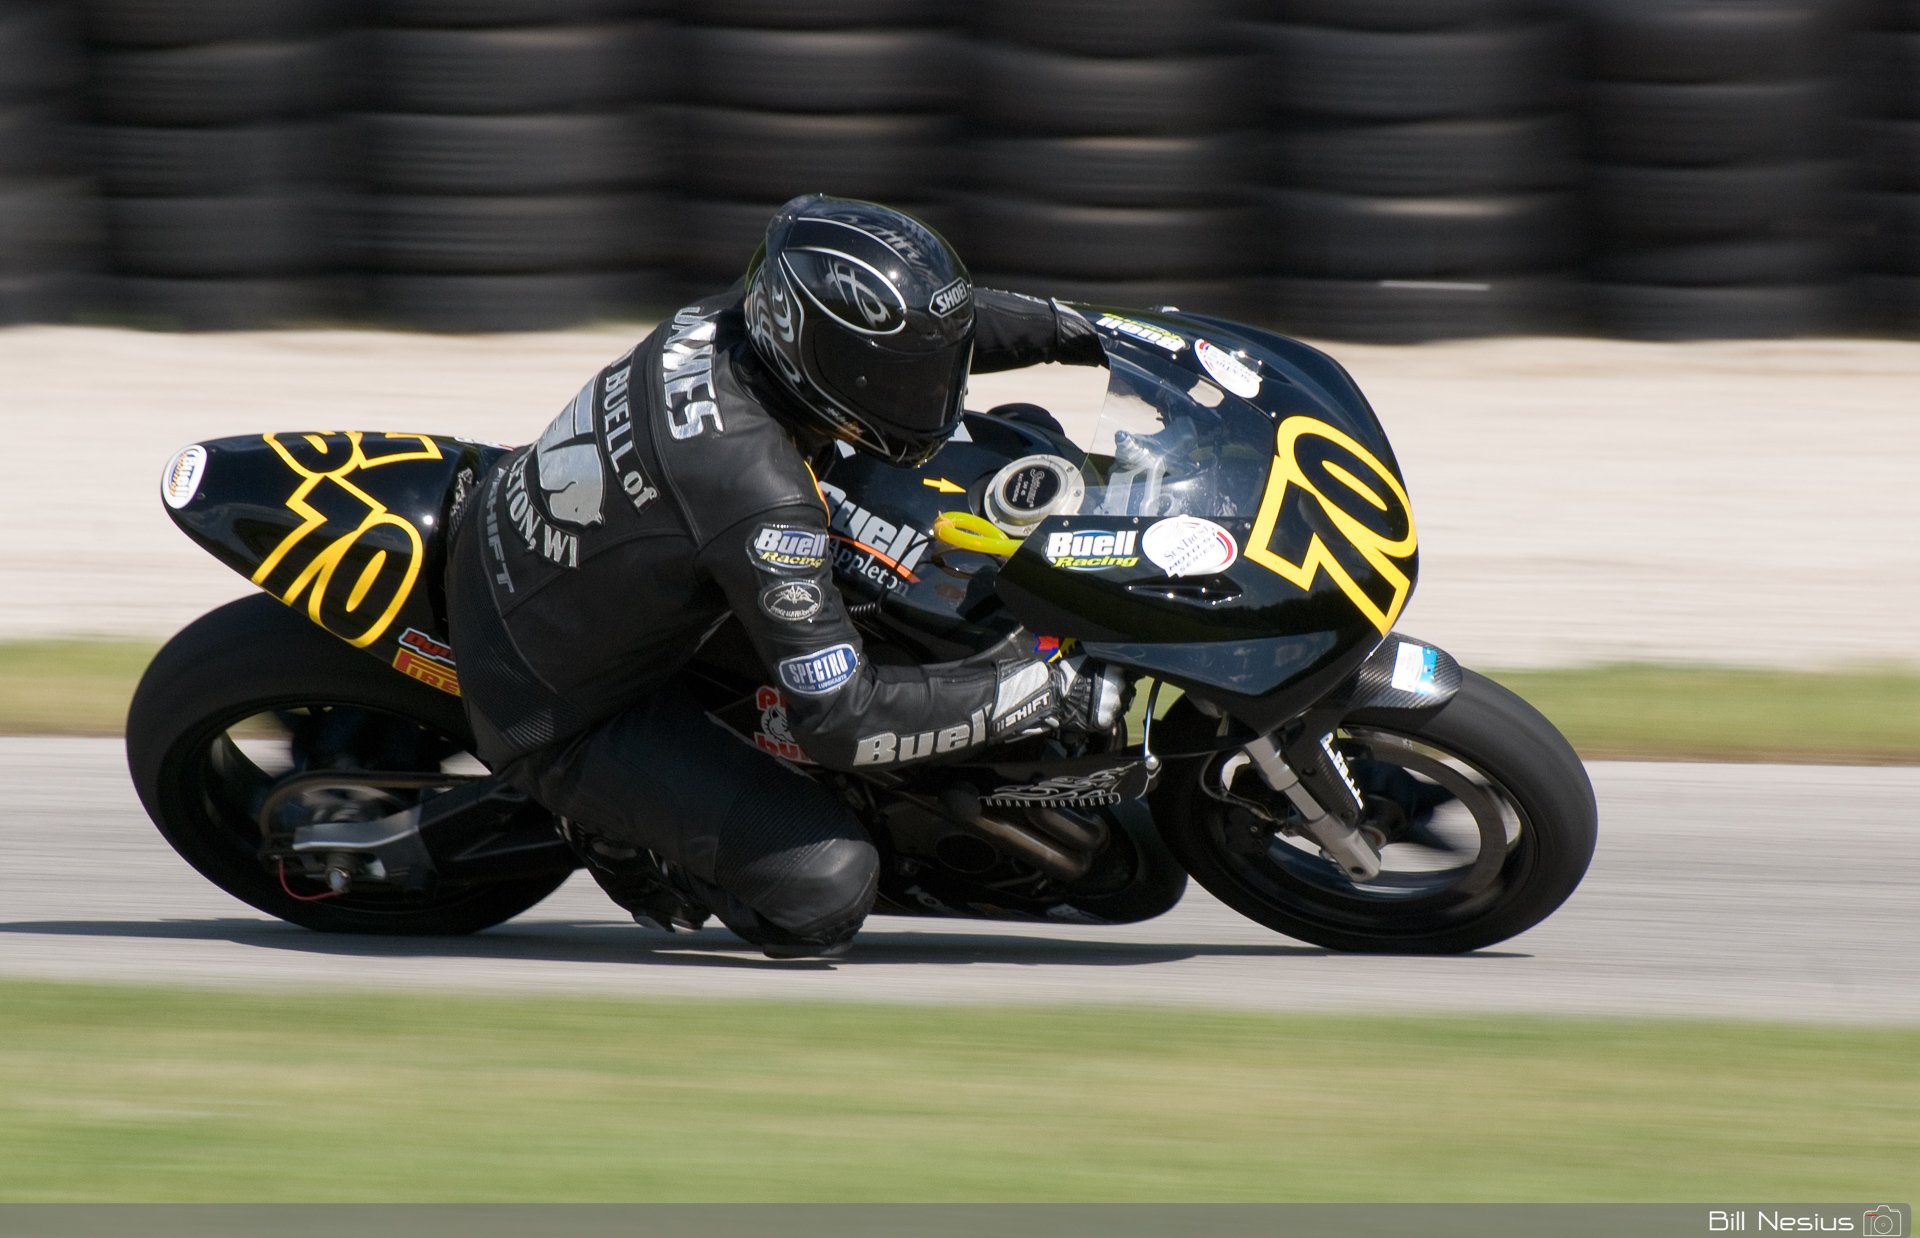 James/Johnson on the Number 70 James Gang Racing/Hoban Brothers Buell XB12R / DSC_3380 / 3